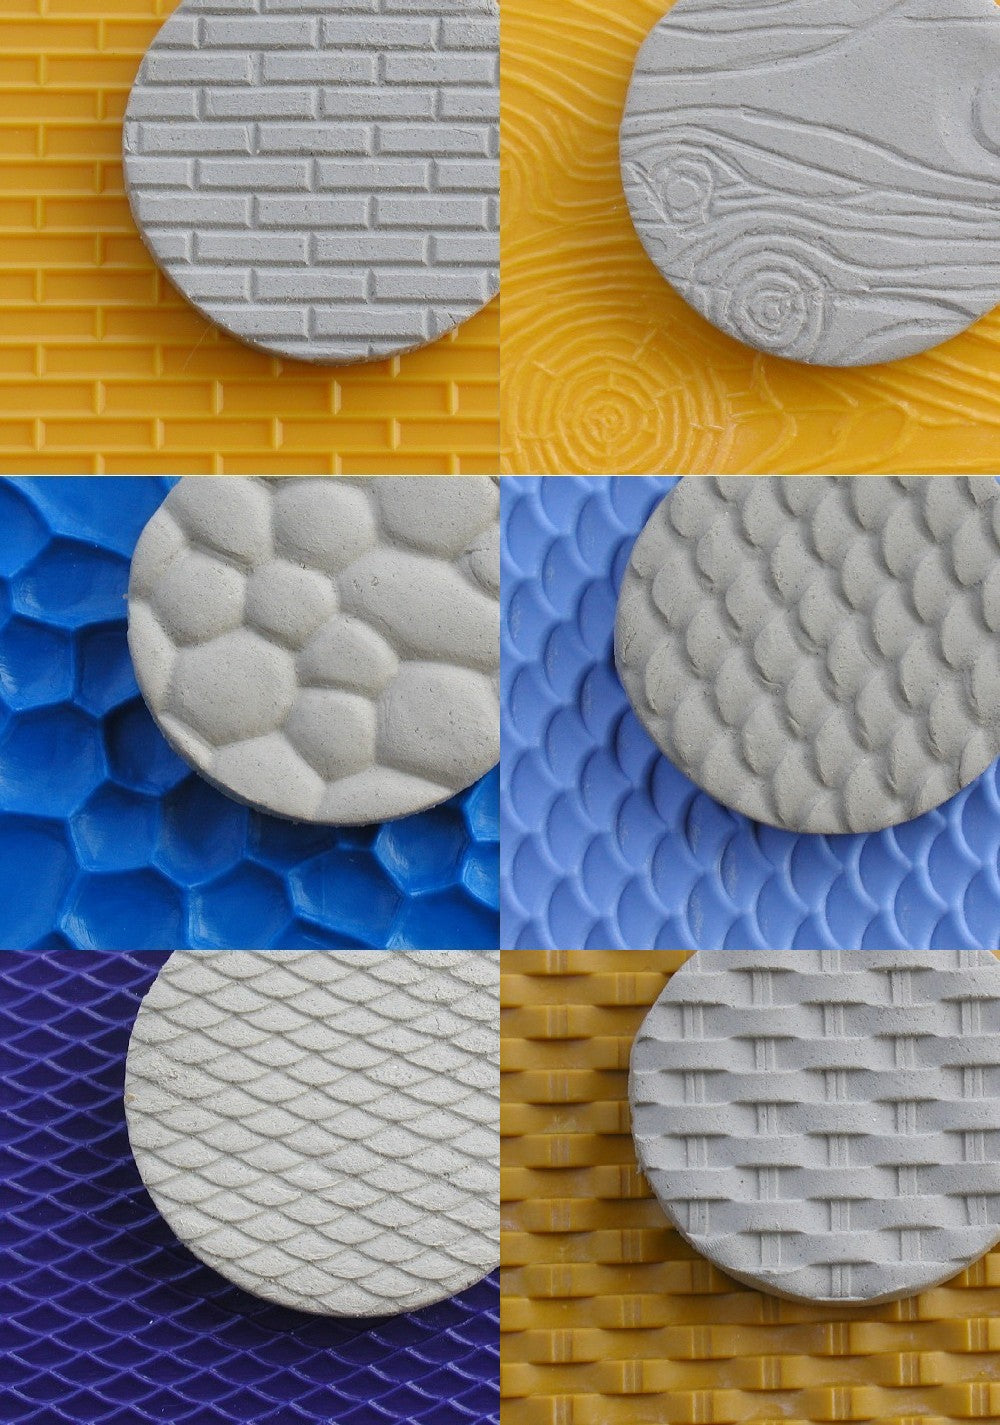 Chinese Clay Art USA Plastic Texture Mats, Dragon Scales Pattern image 2